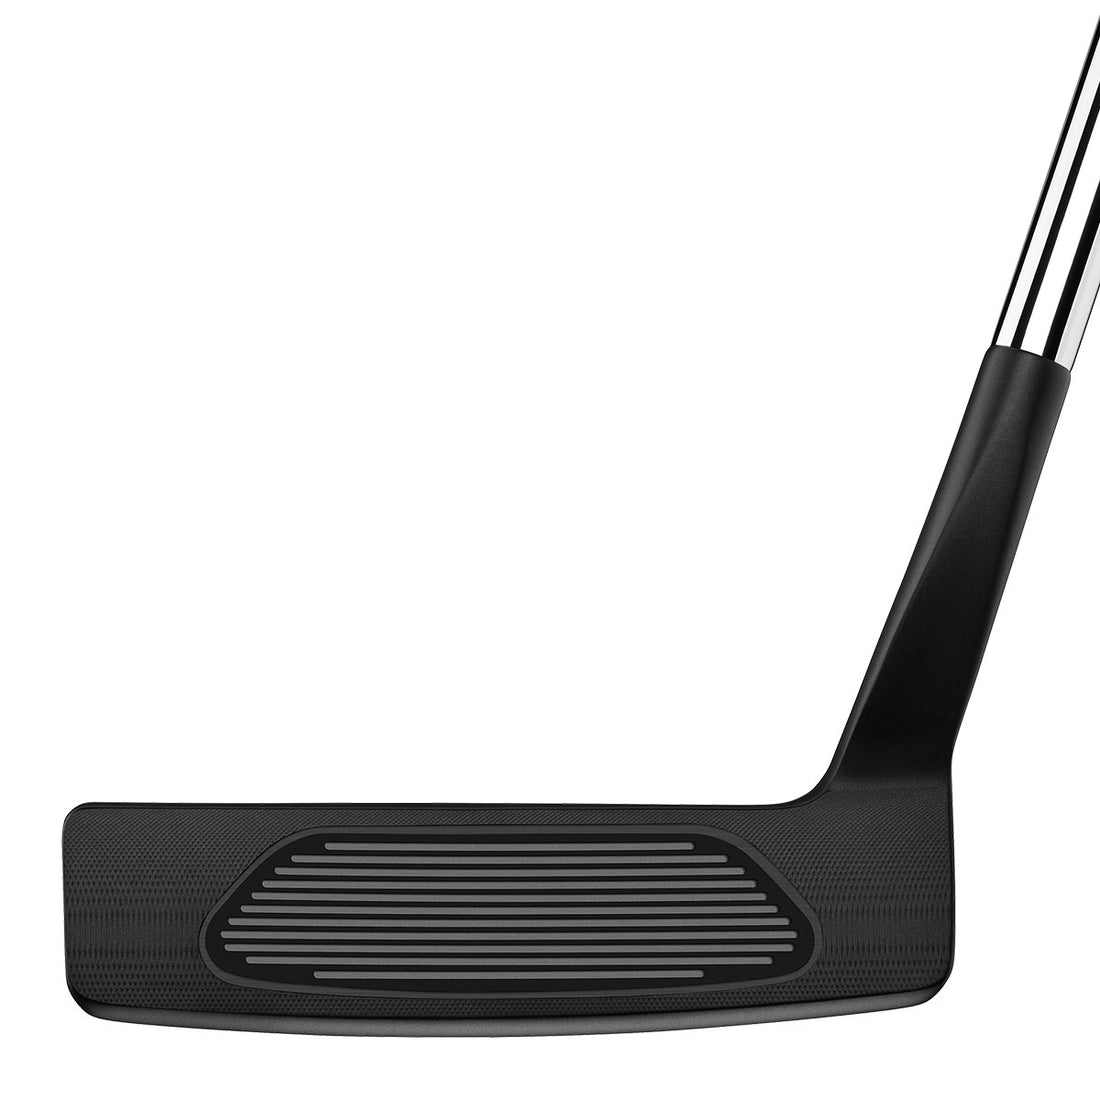 TAYLORMADE TP BLACK COLLECTION BALBOA #8 PUTTER